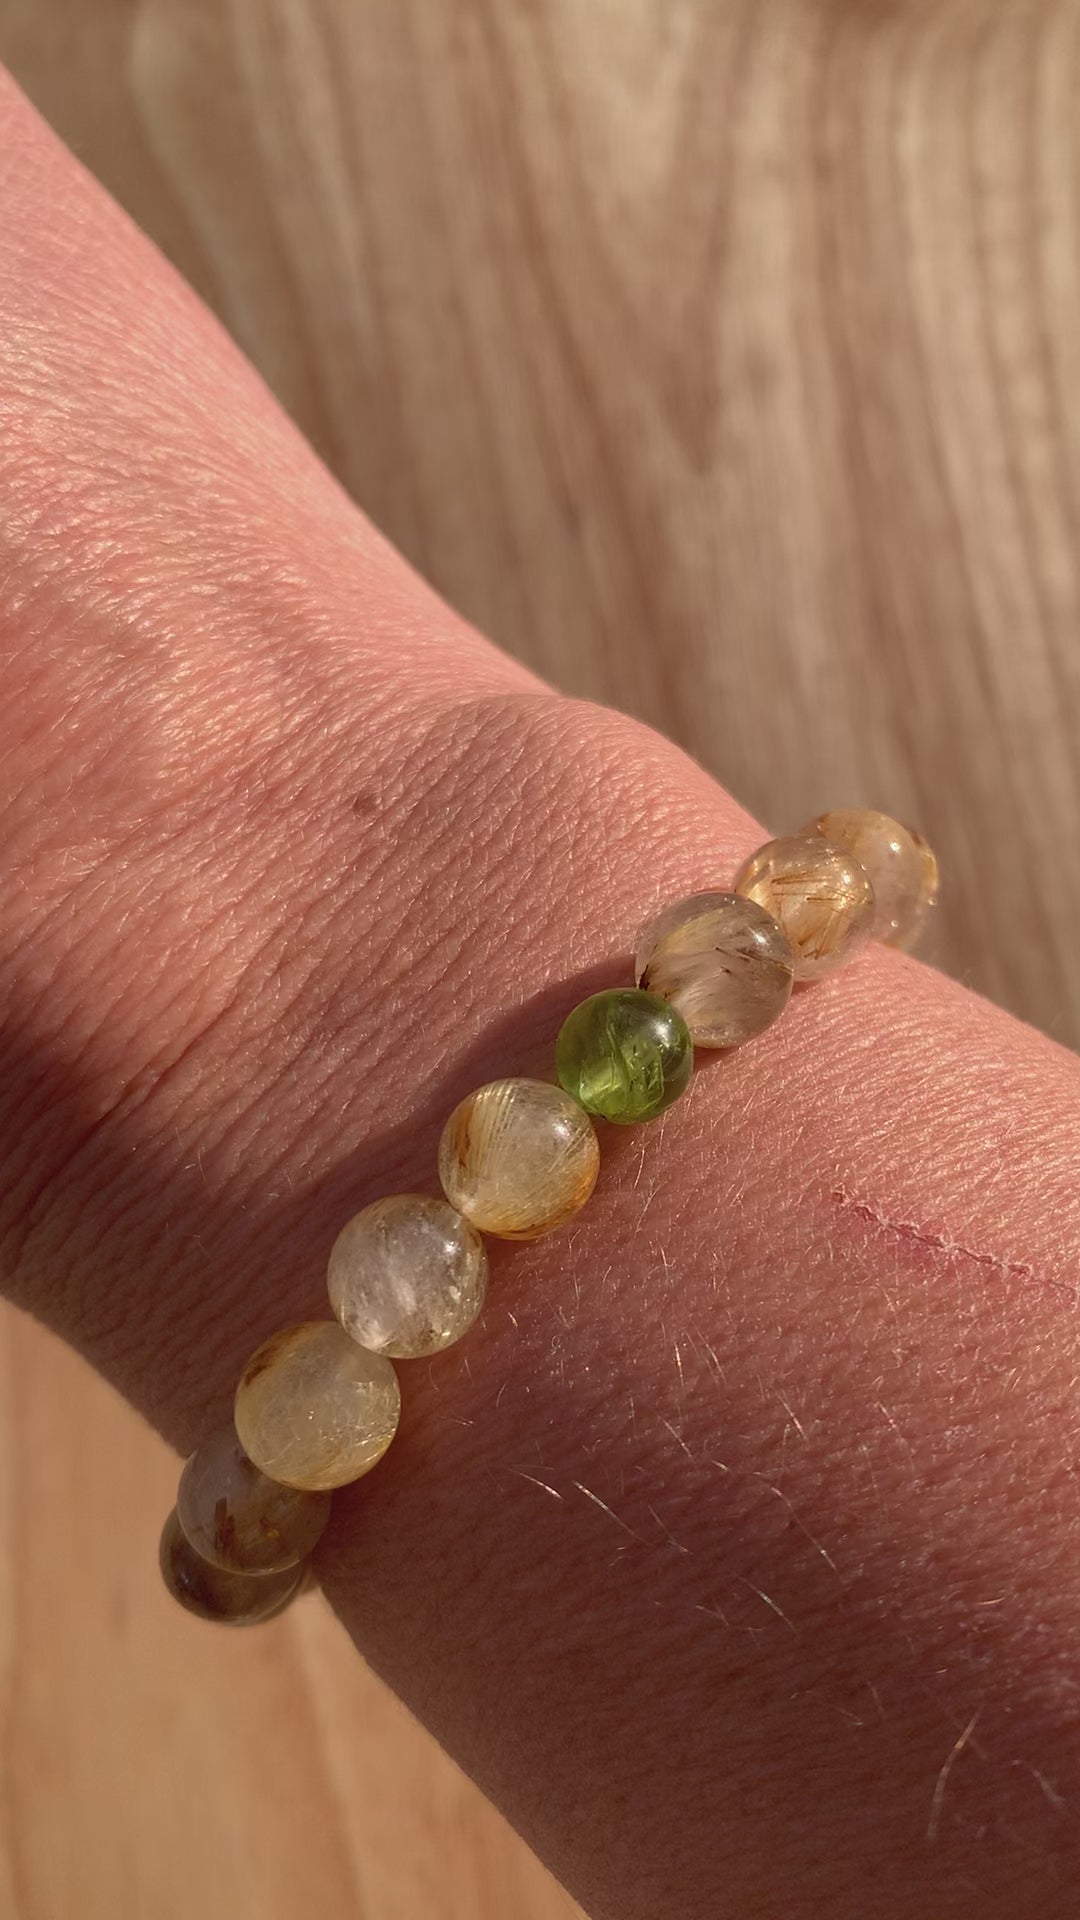 Video of Healing Crystal Bracelets Rutilated Quartz with Peridot Accent in the Sun